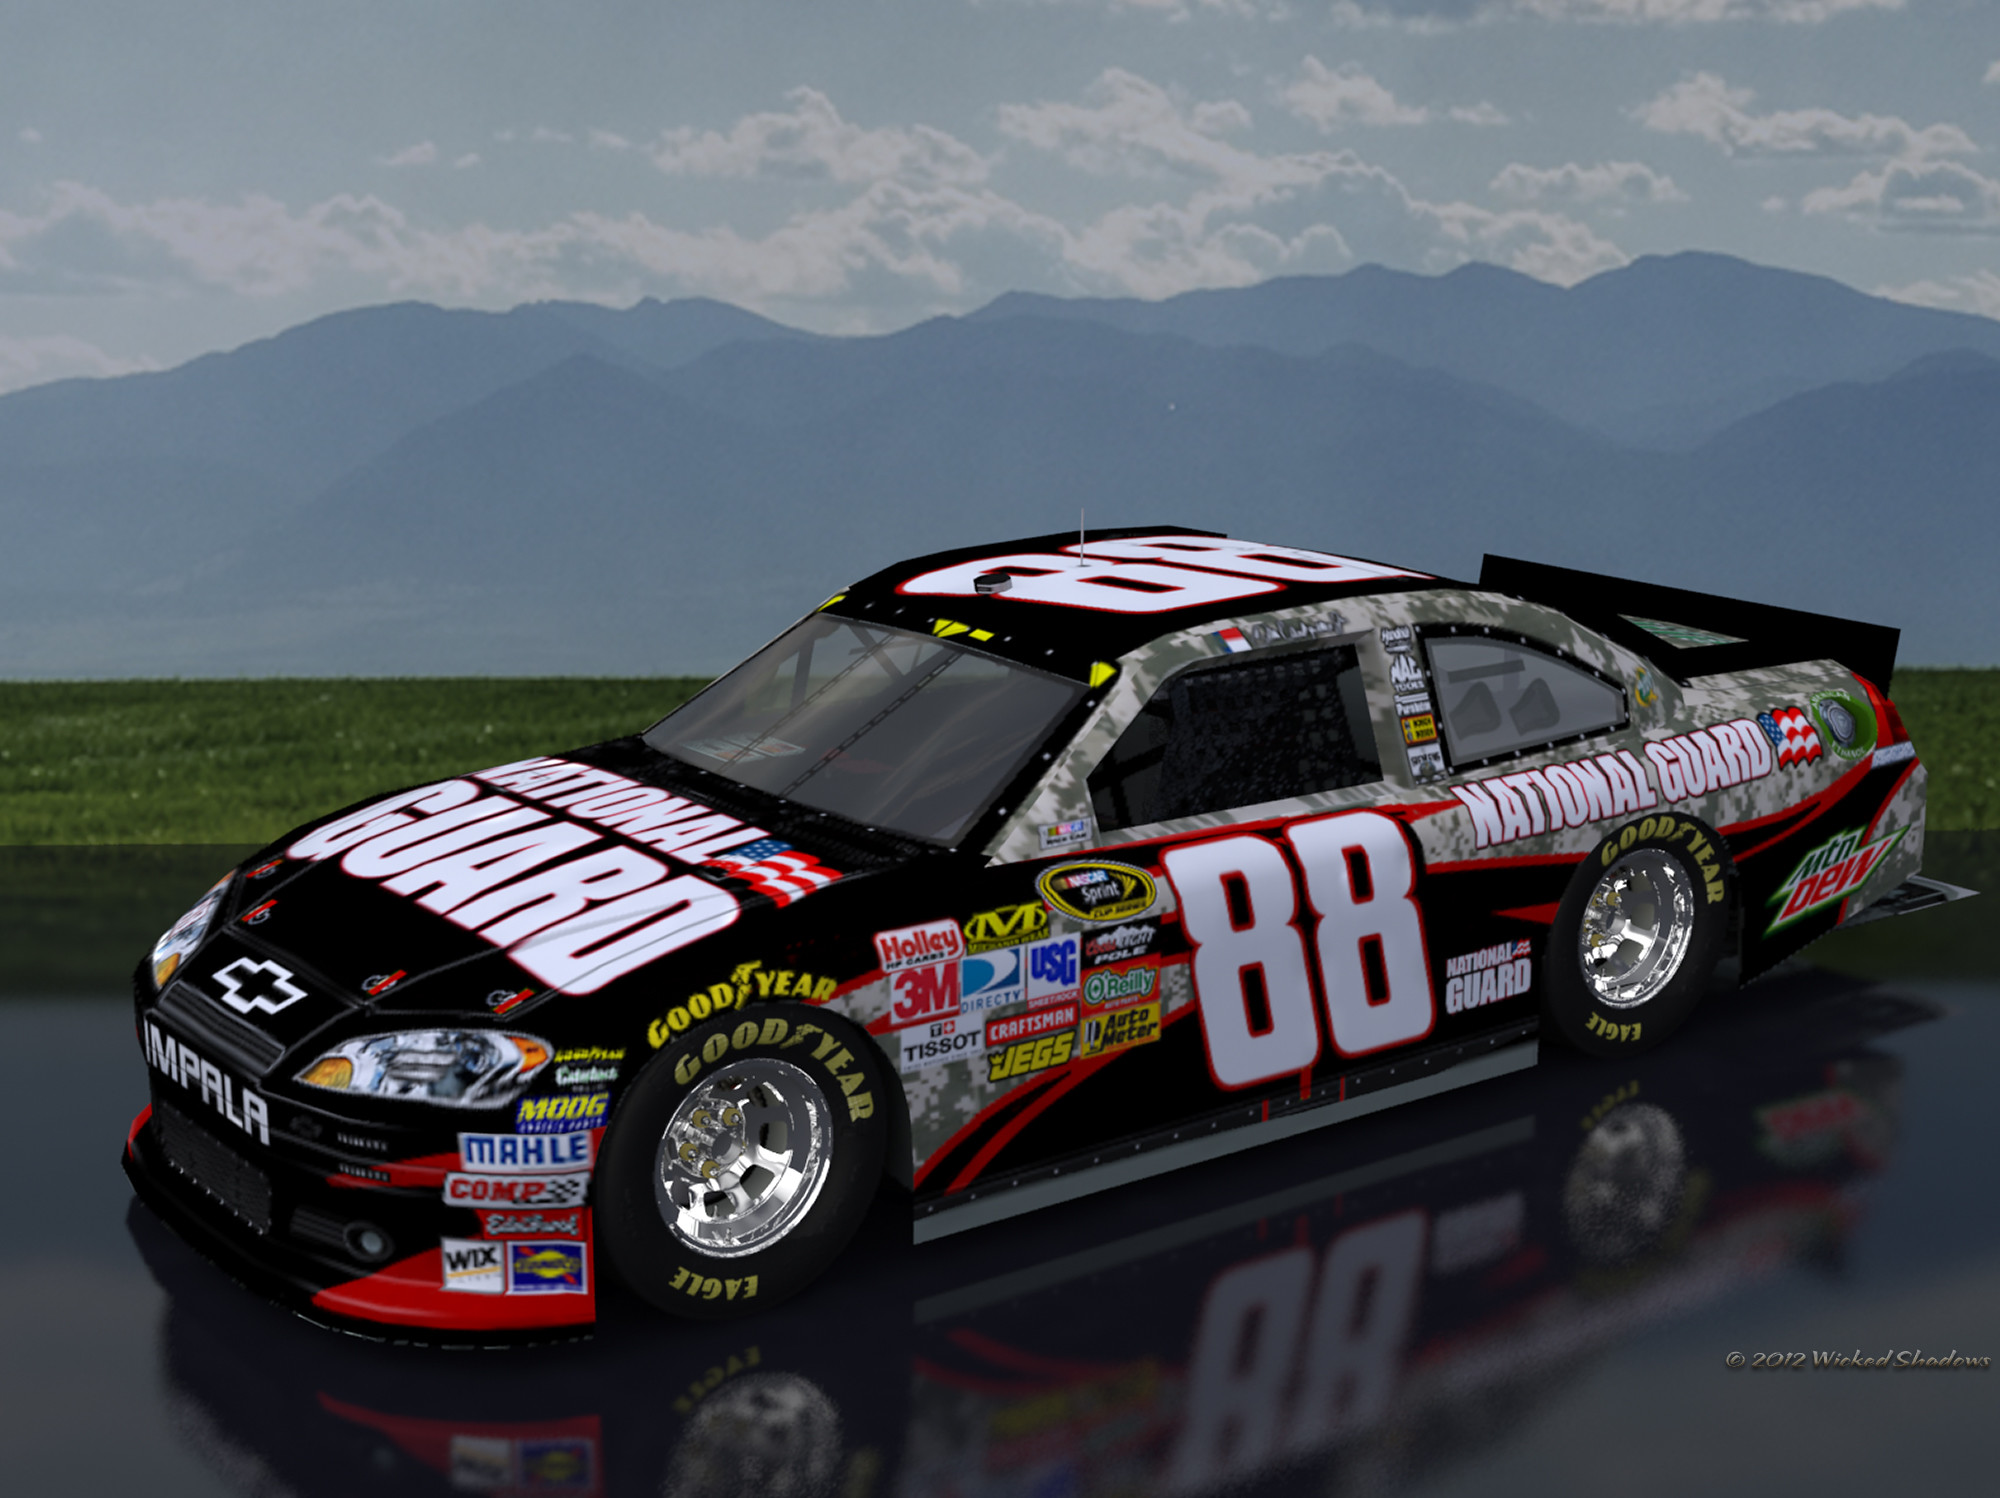 2000x1498 ... wallpapers by wicked shadows dale earnhardt jr national guard ...